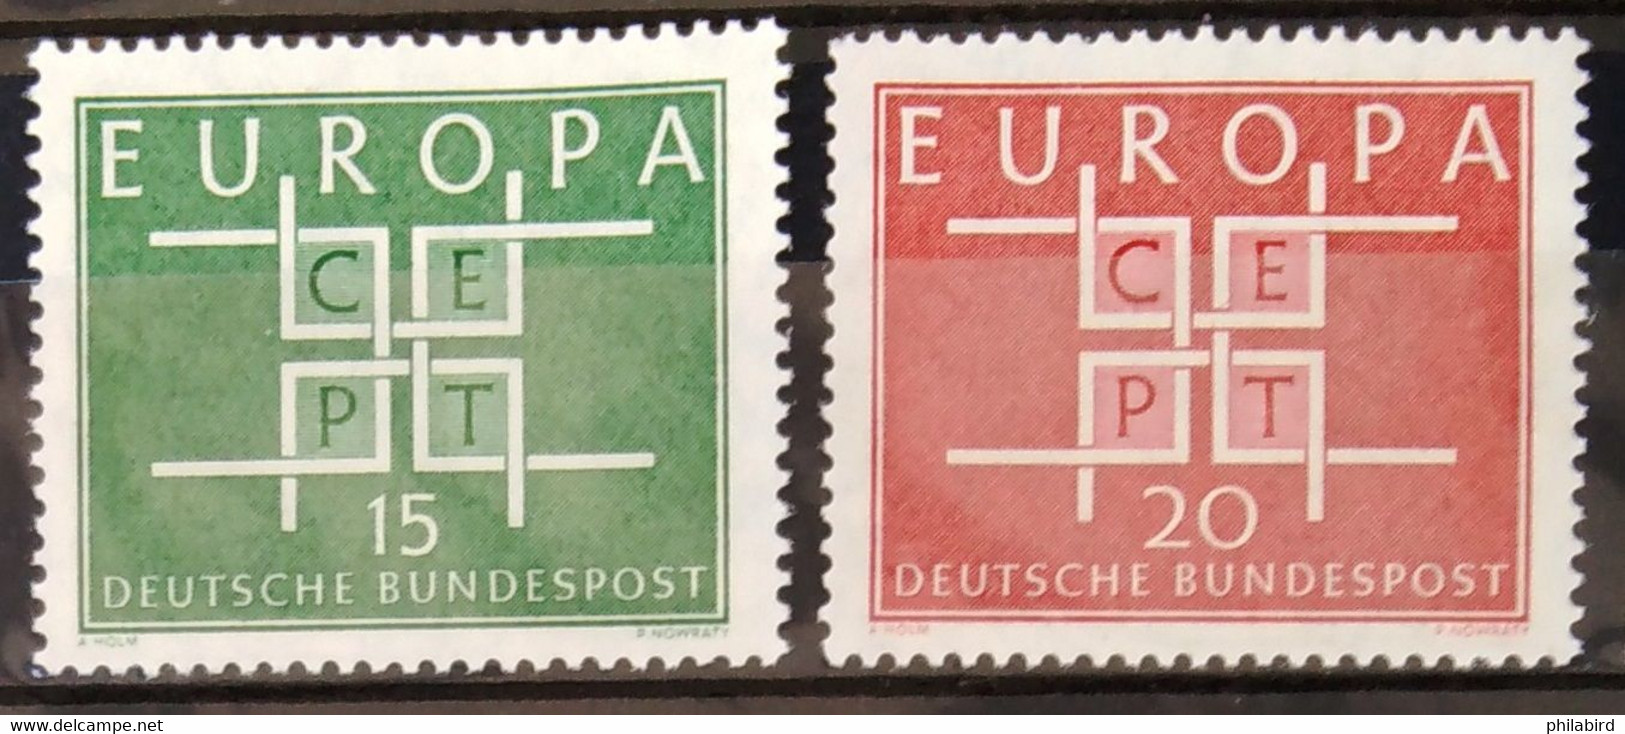 EUROPA 1963 - ALLEMAGNE                   N° 278/279                        NEUF** - 1963